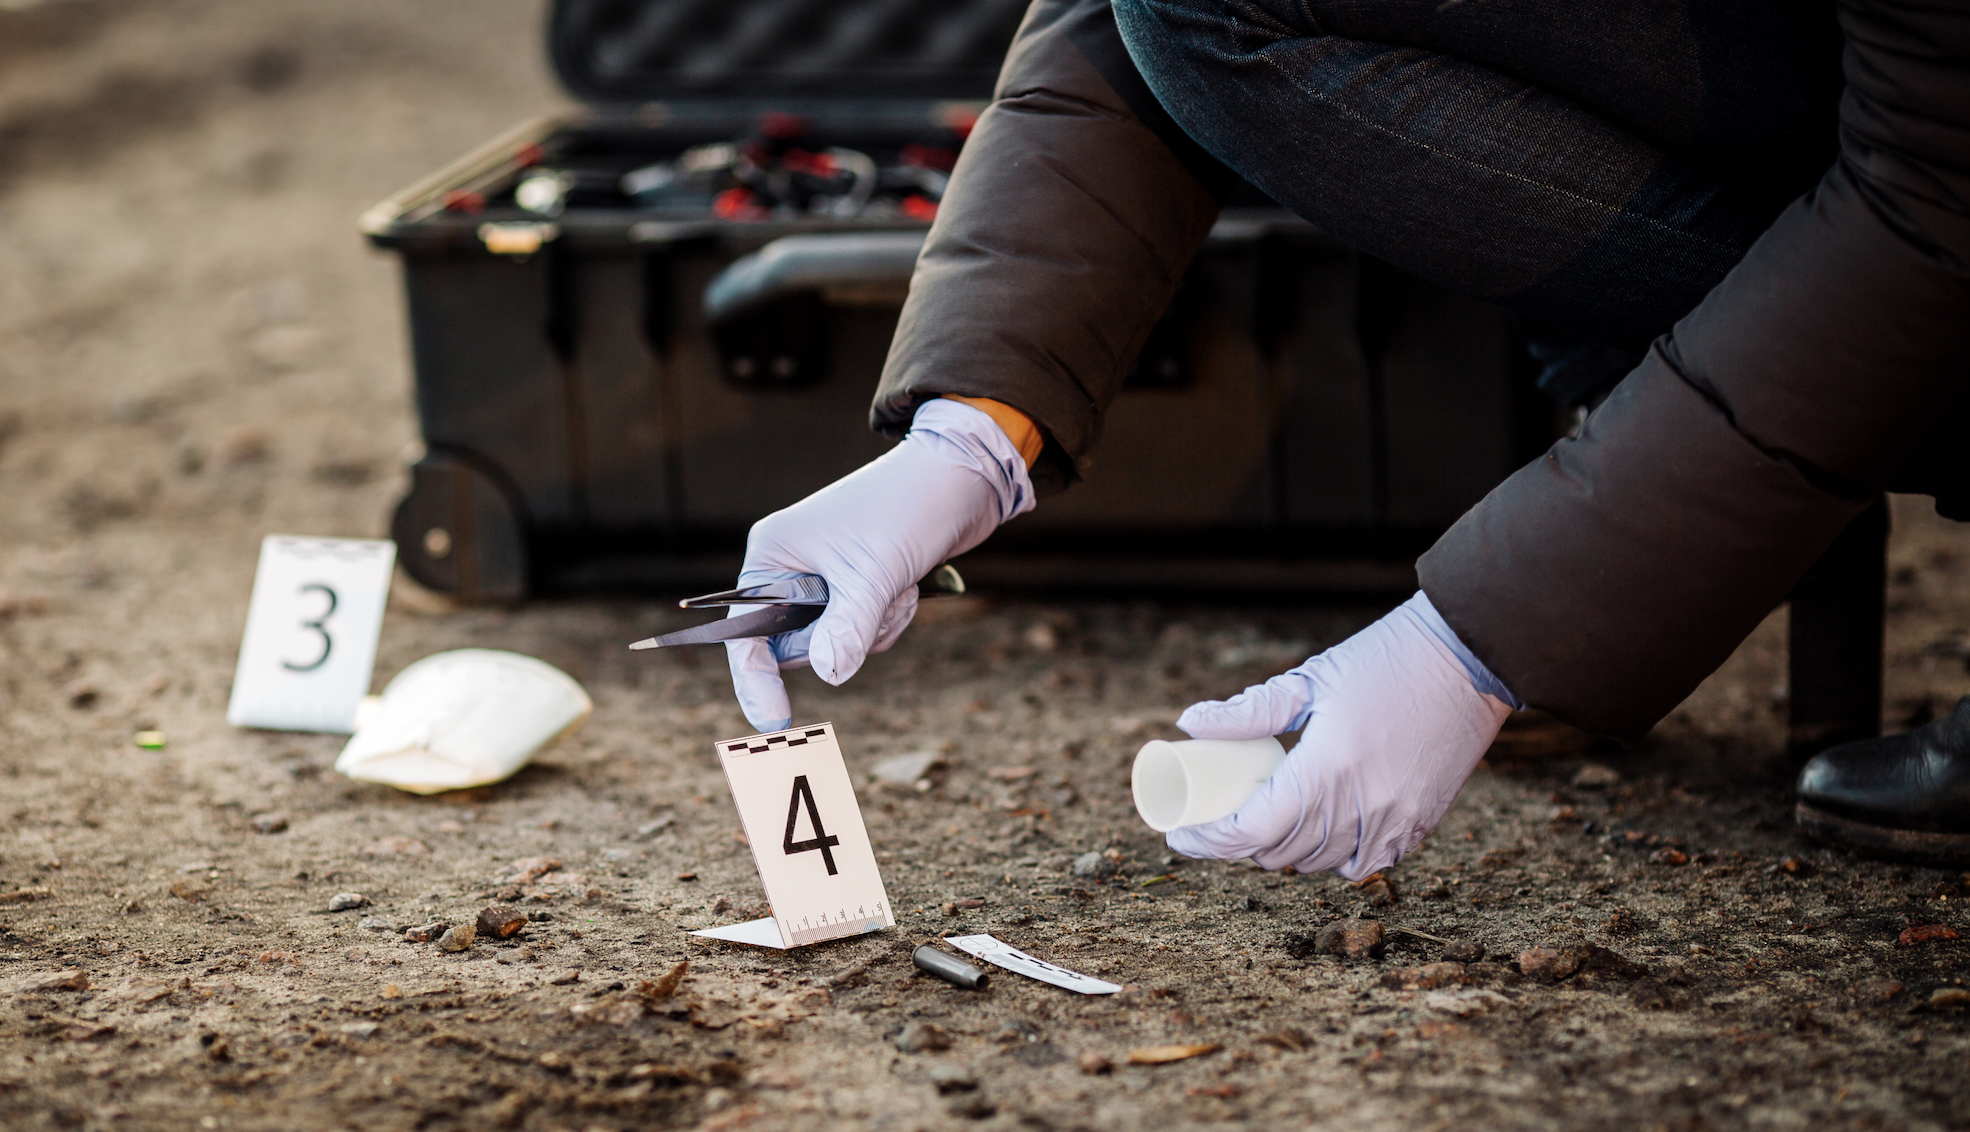 Image of a forensic scientist collecting evidence at a crime scene